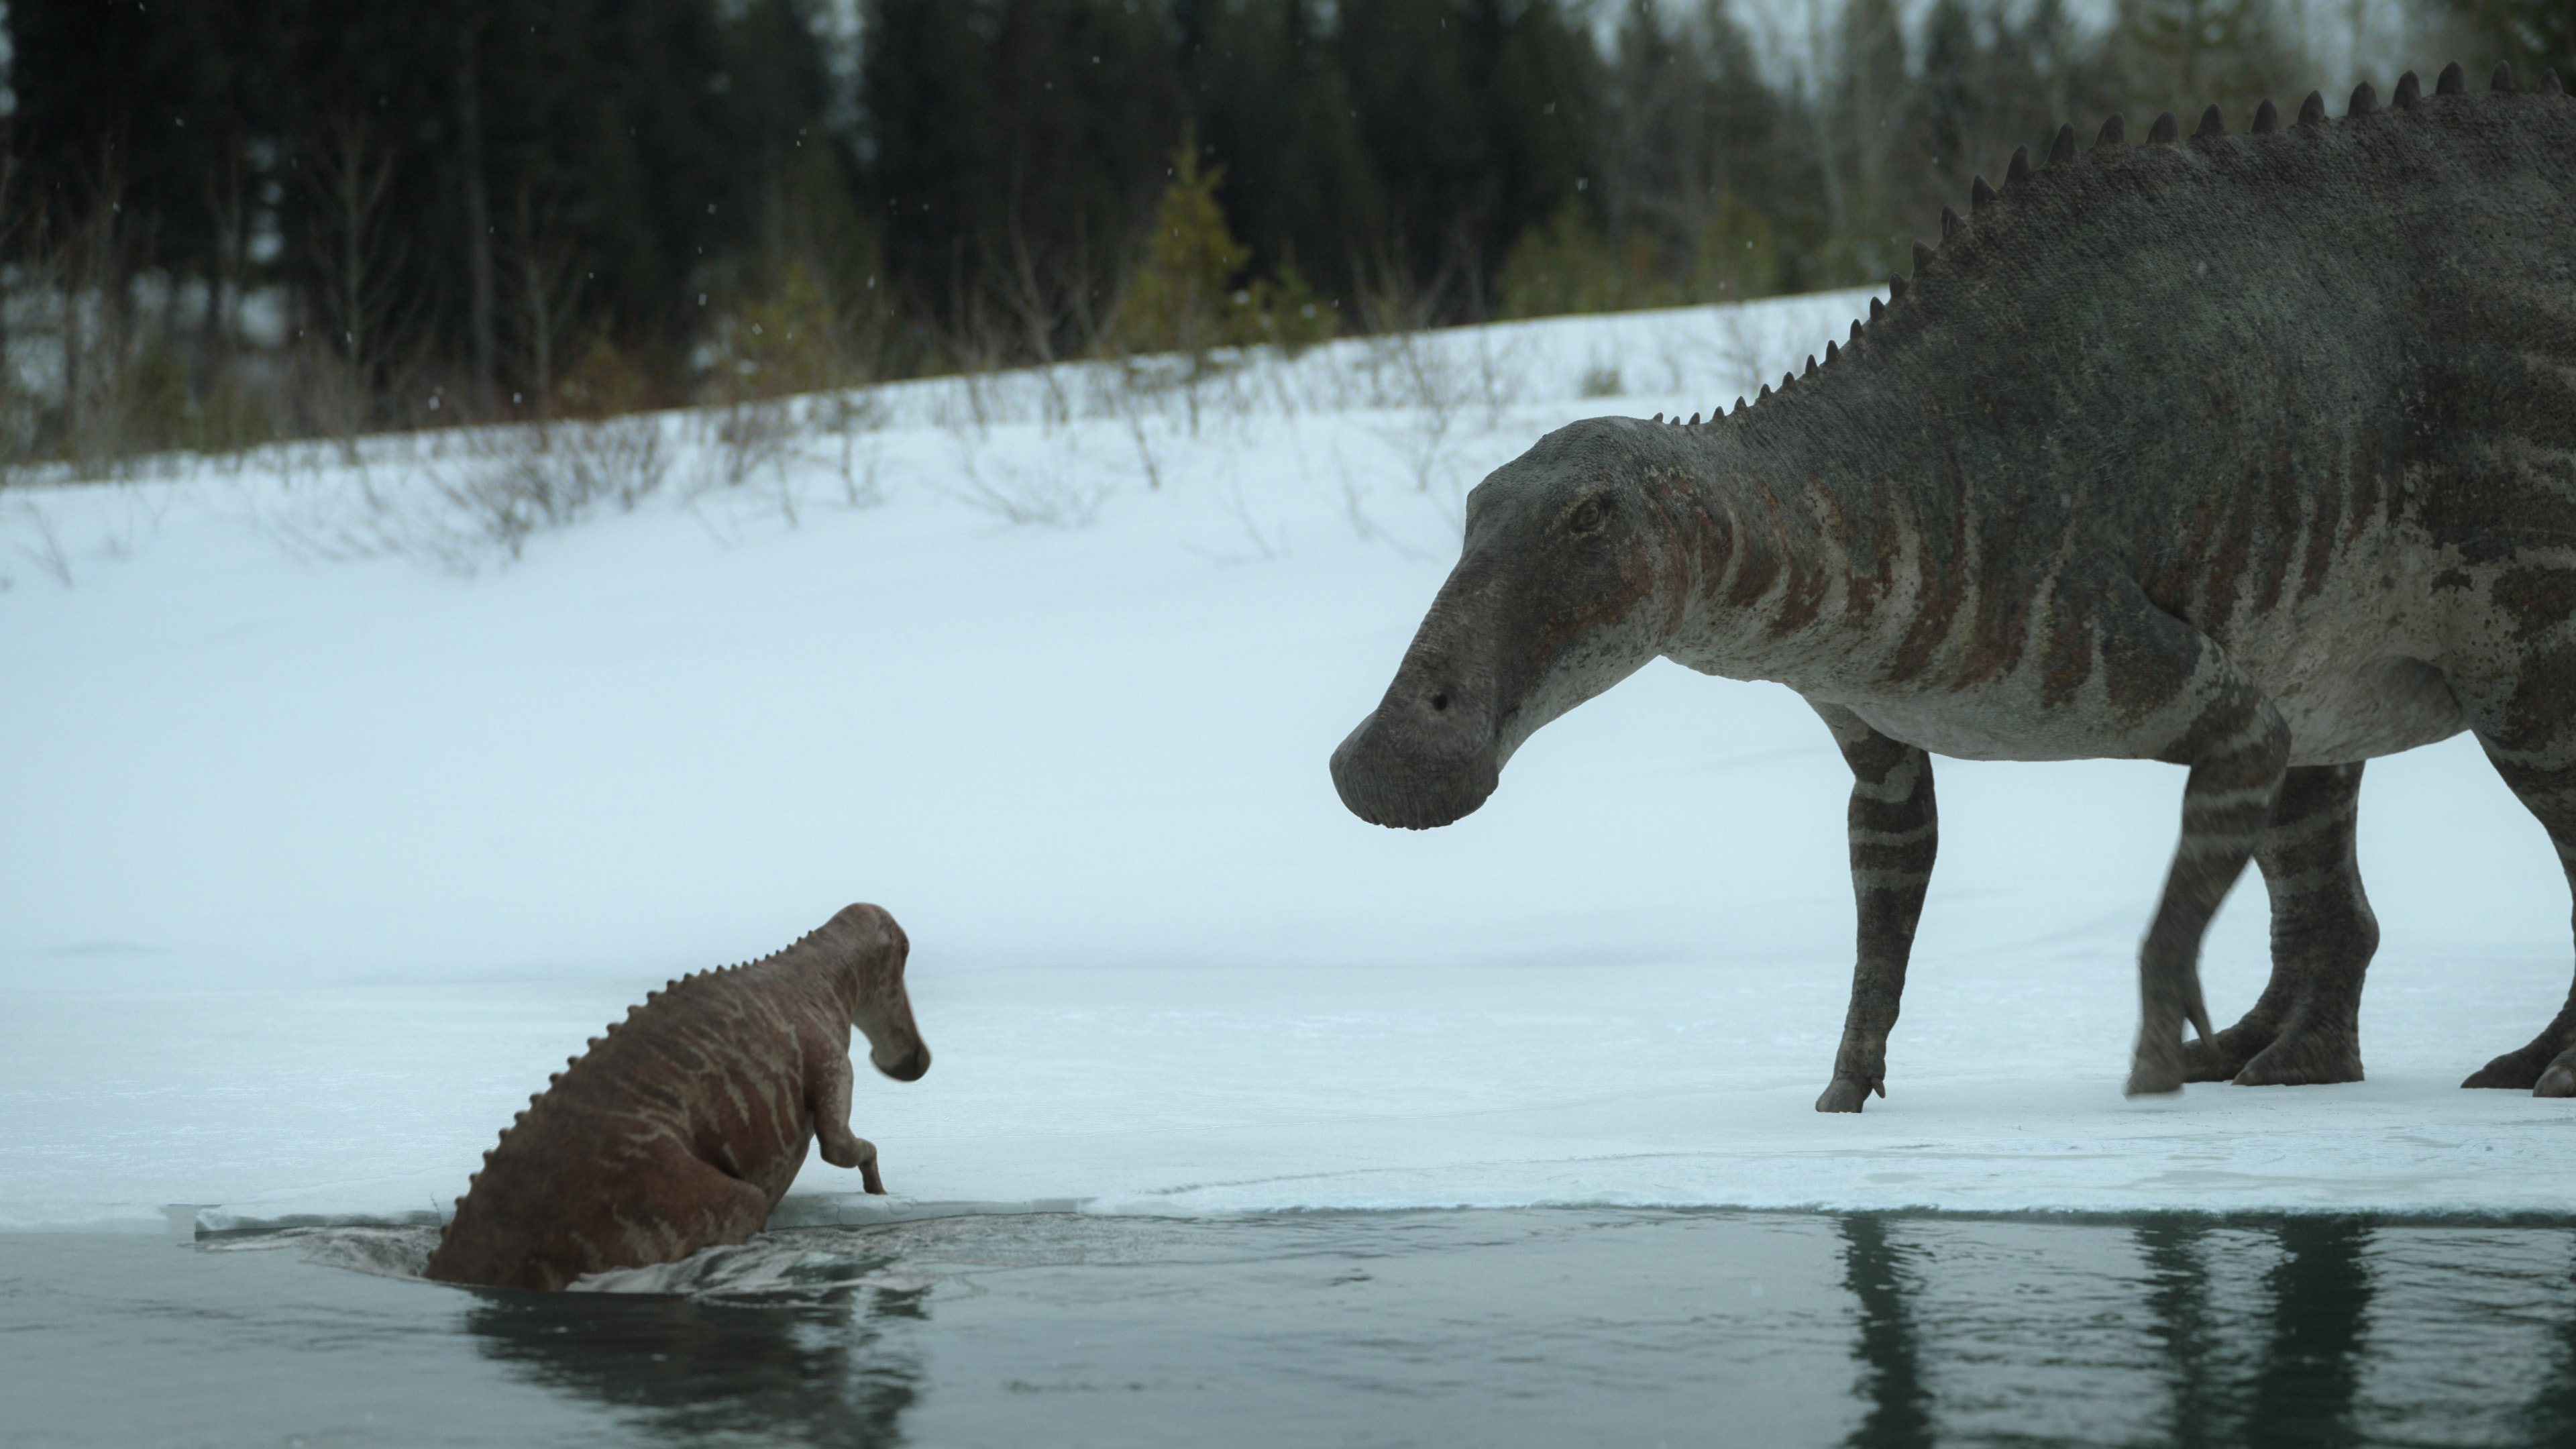 A juvenile Edmontosaurus emerging from the water next to an adult Edmontosaurus in 